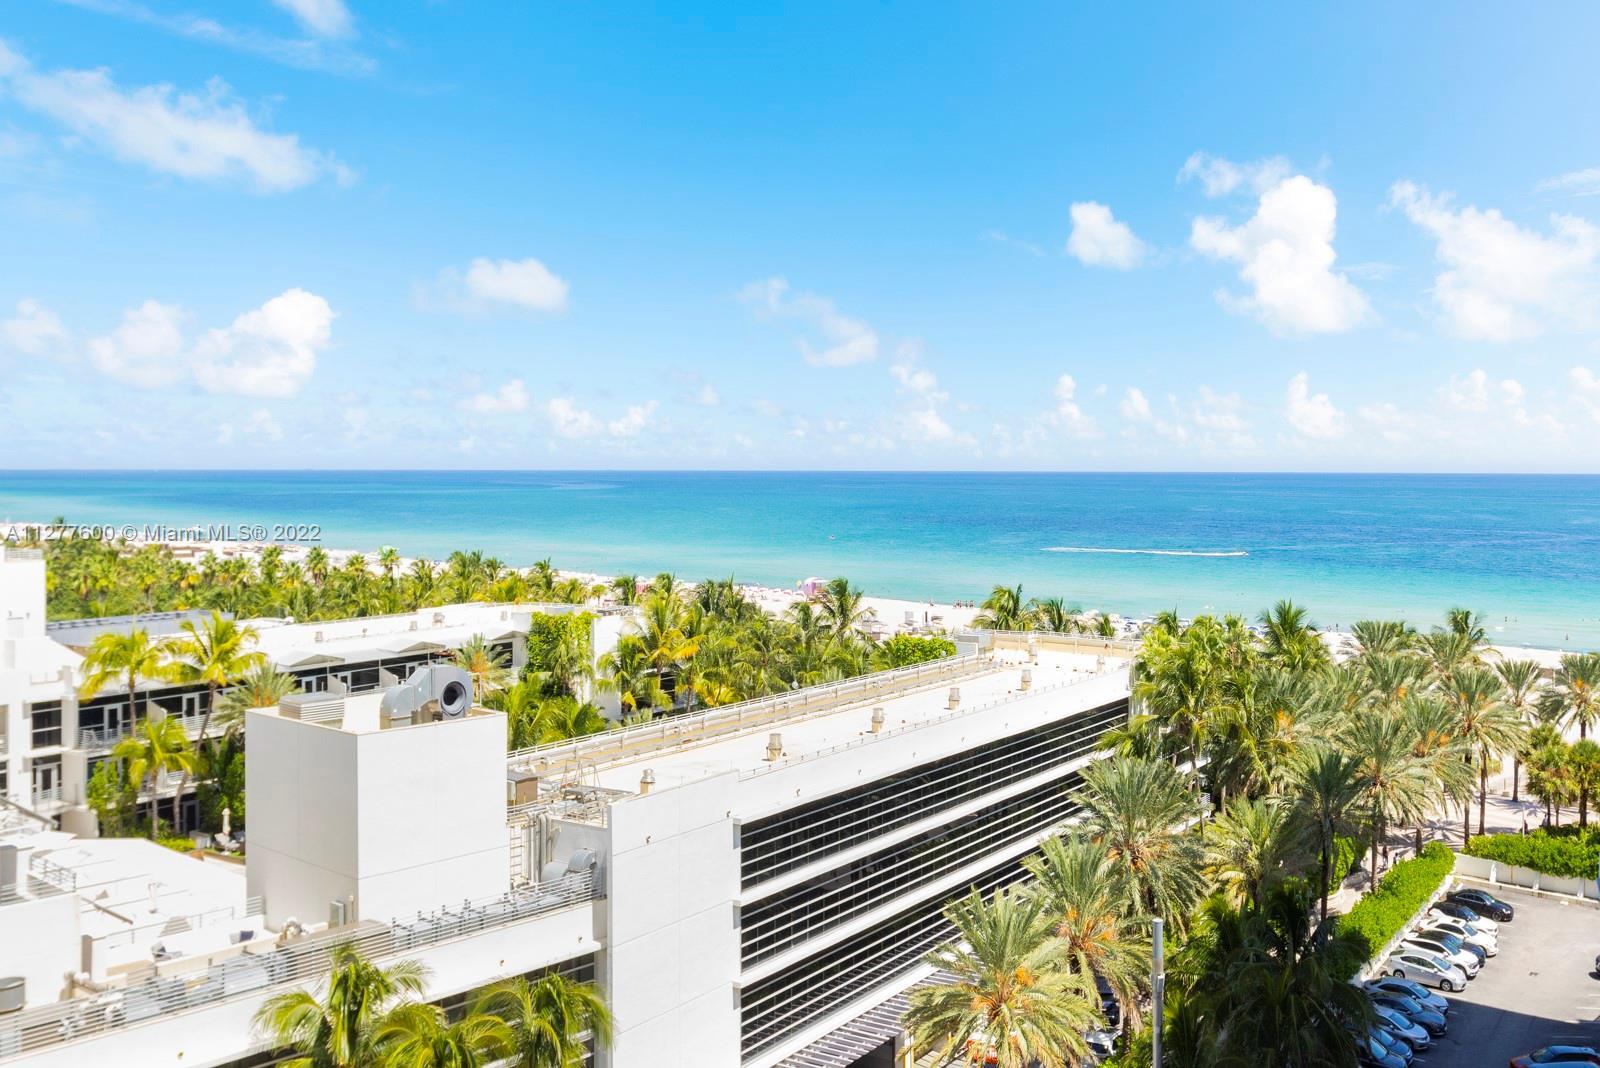 The Decoplage Condominium offers resort-style living and direct beach access at the top of Lincoln R